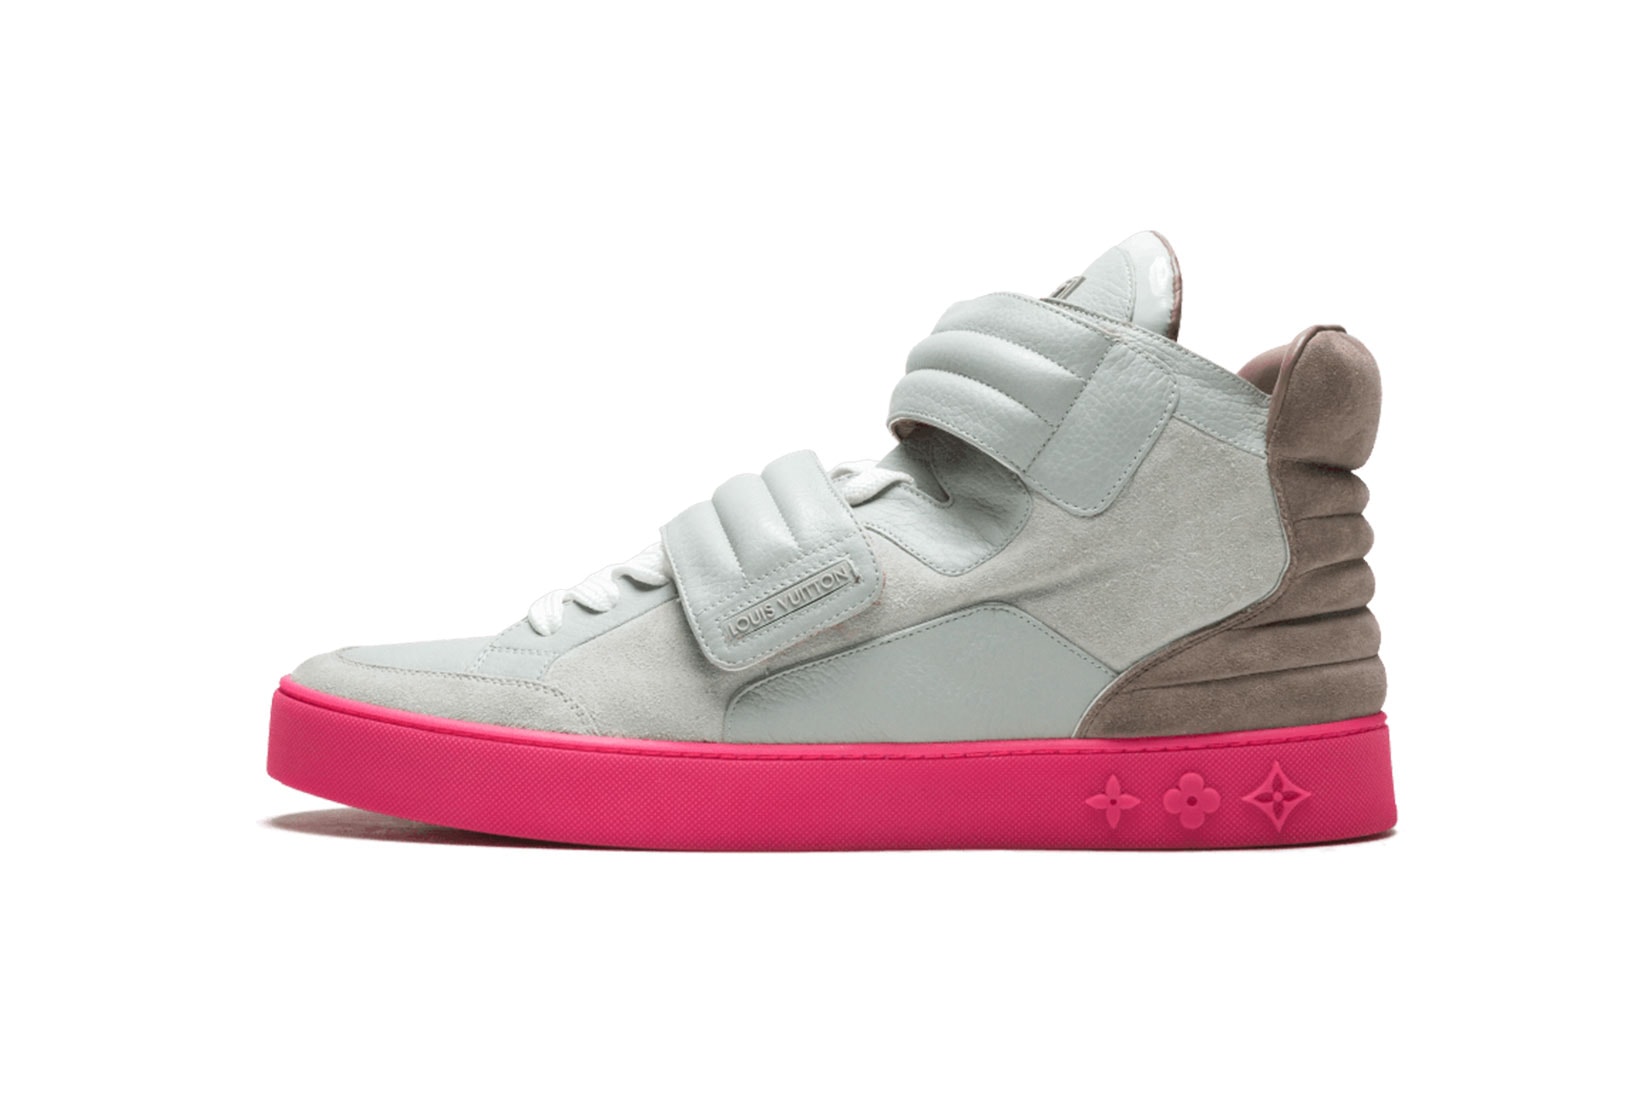 Louis Vuitton x Kanye West Don 'Patchwork' Yeezy Low Top Sneakers